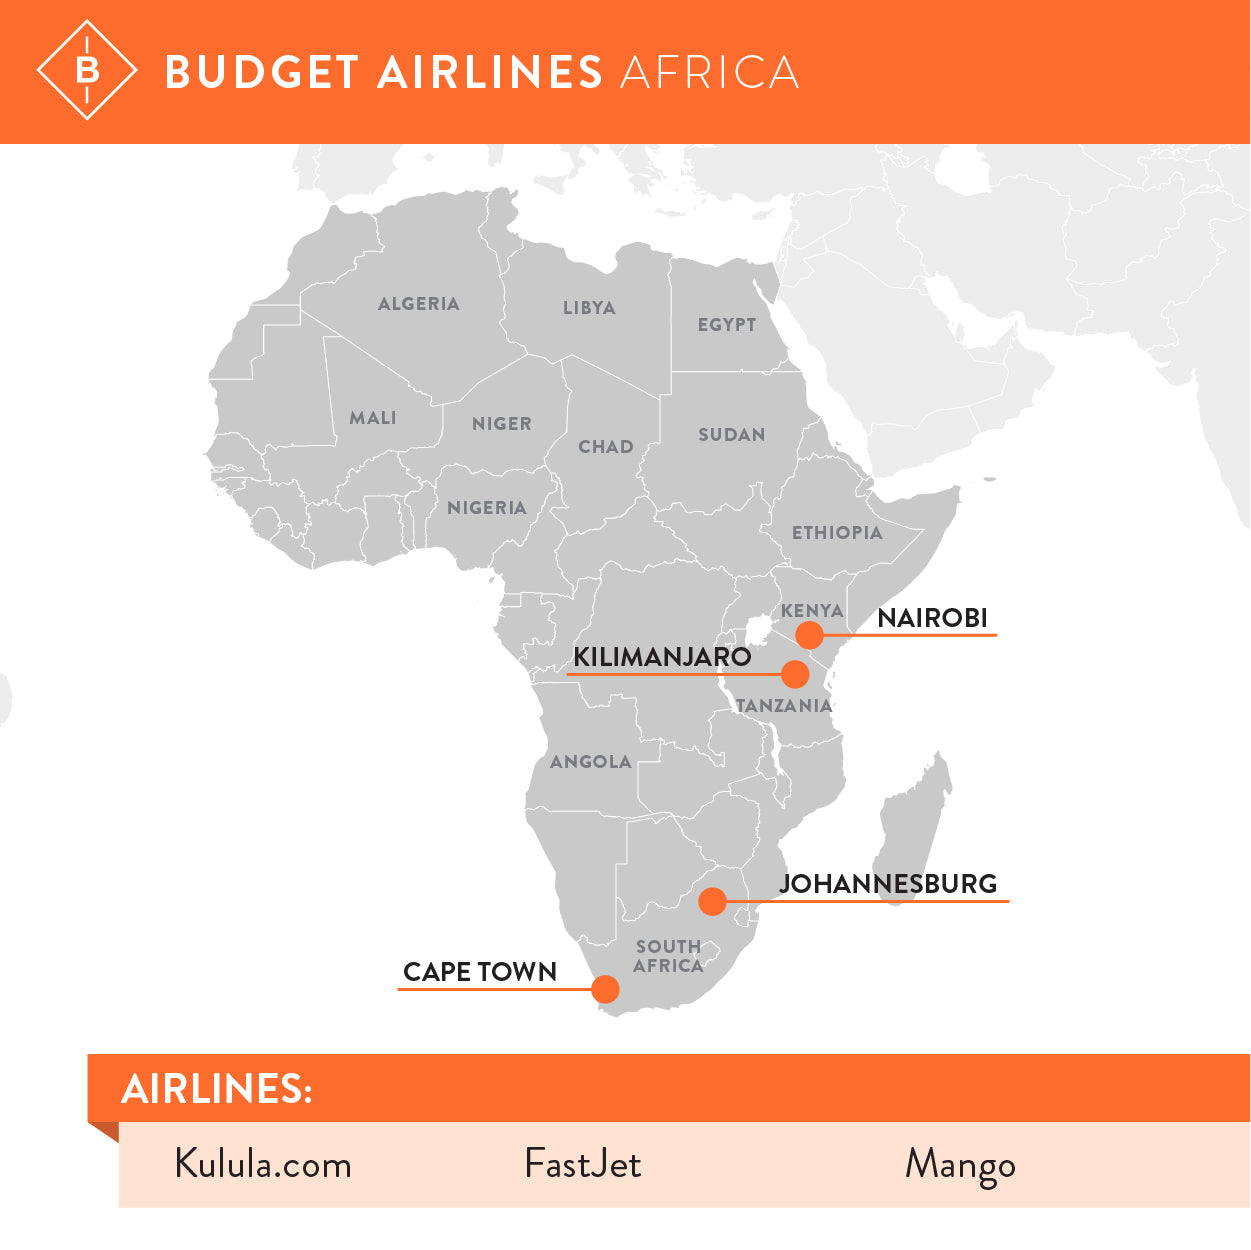 Low cost airline carriers in Africa.